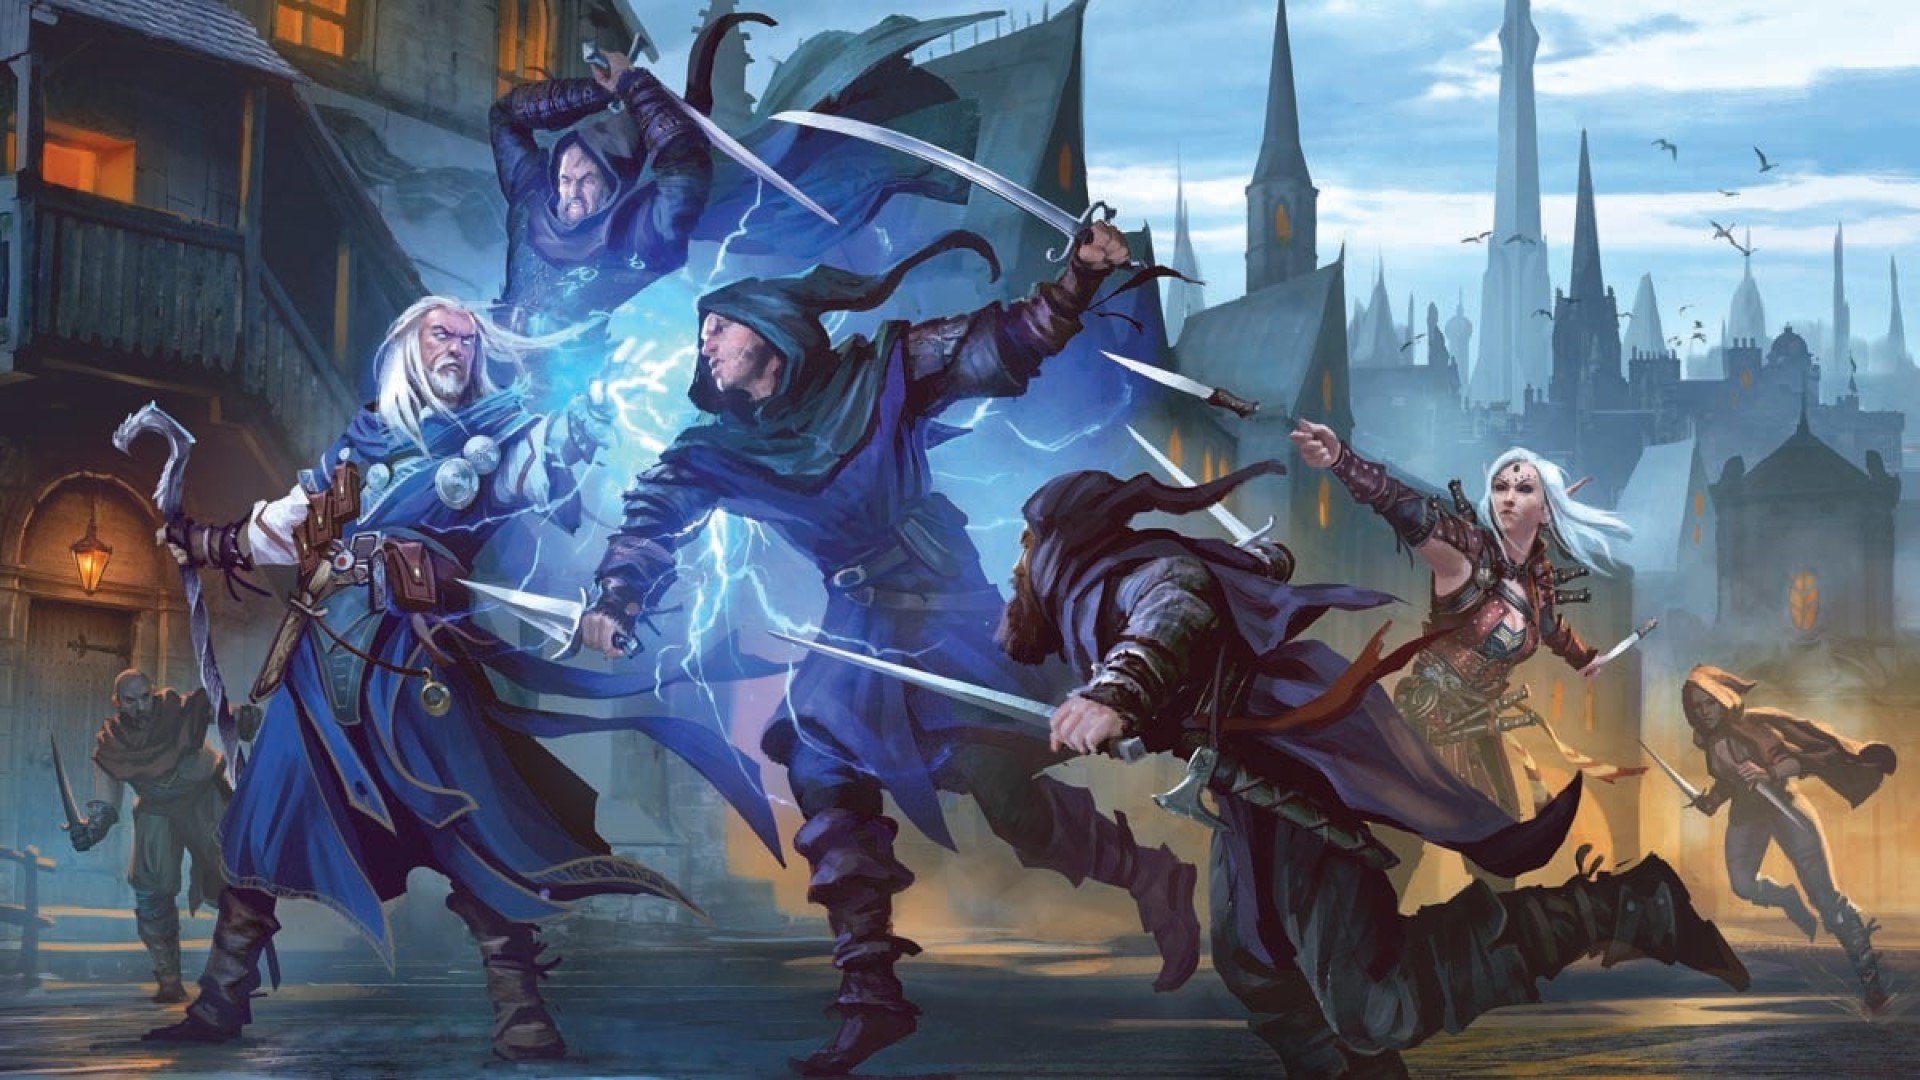 Humble RPG Bundle: So You Wanna Try Out Pathfinder by Paizo